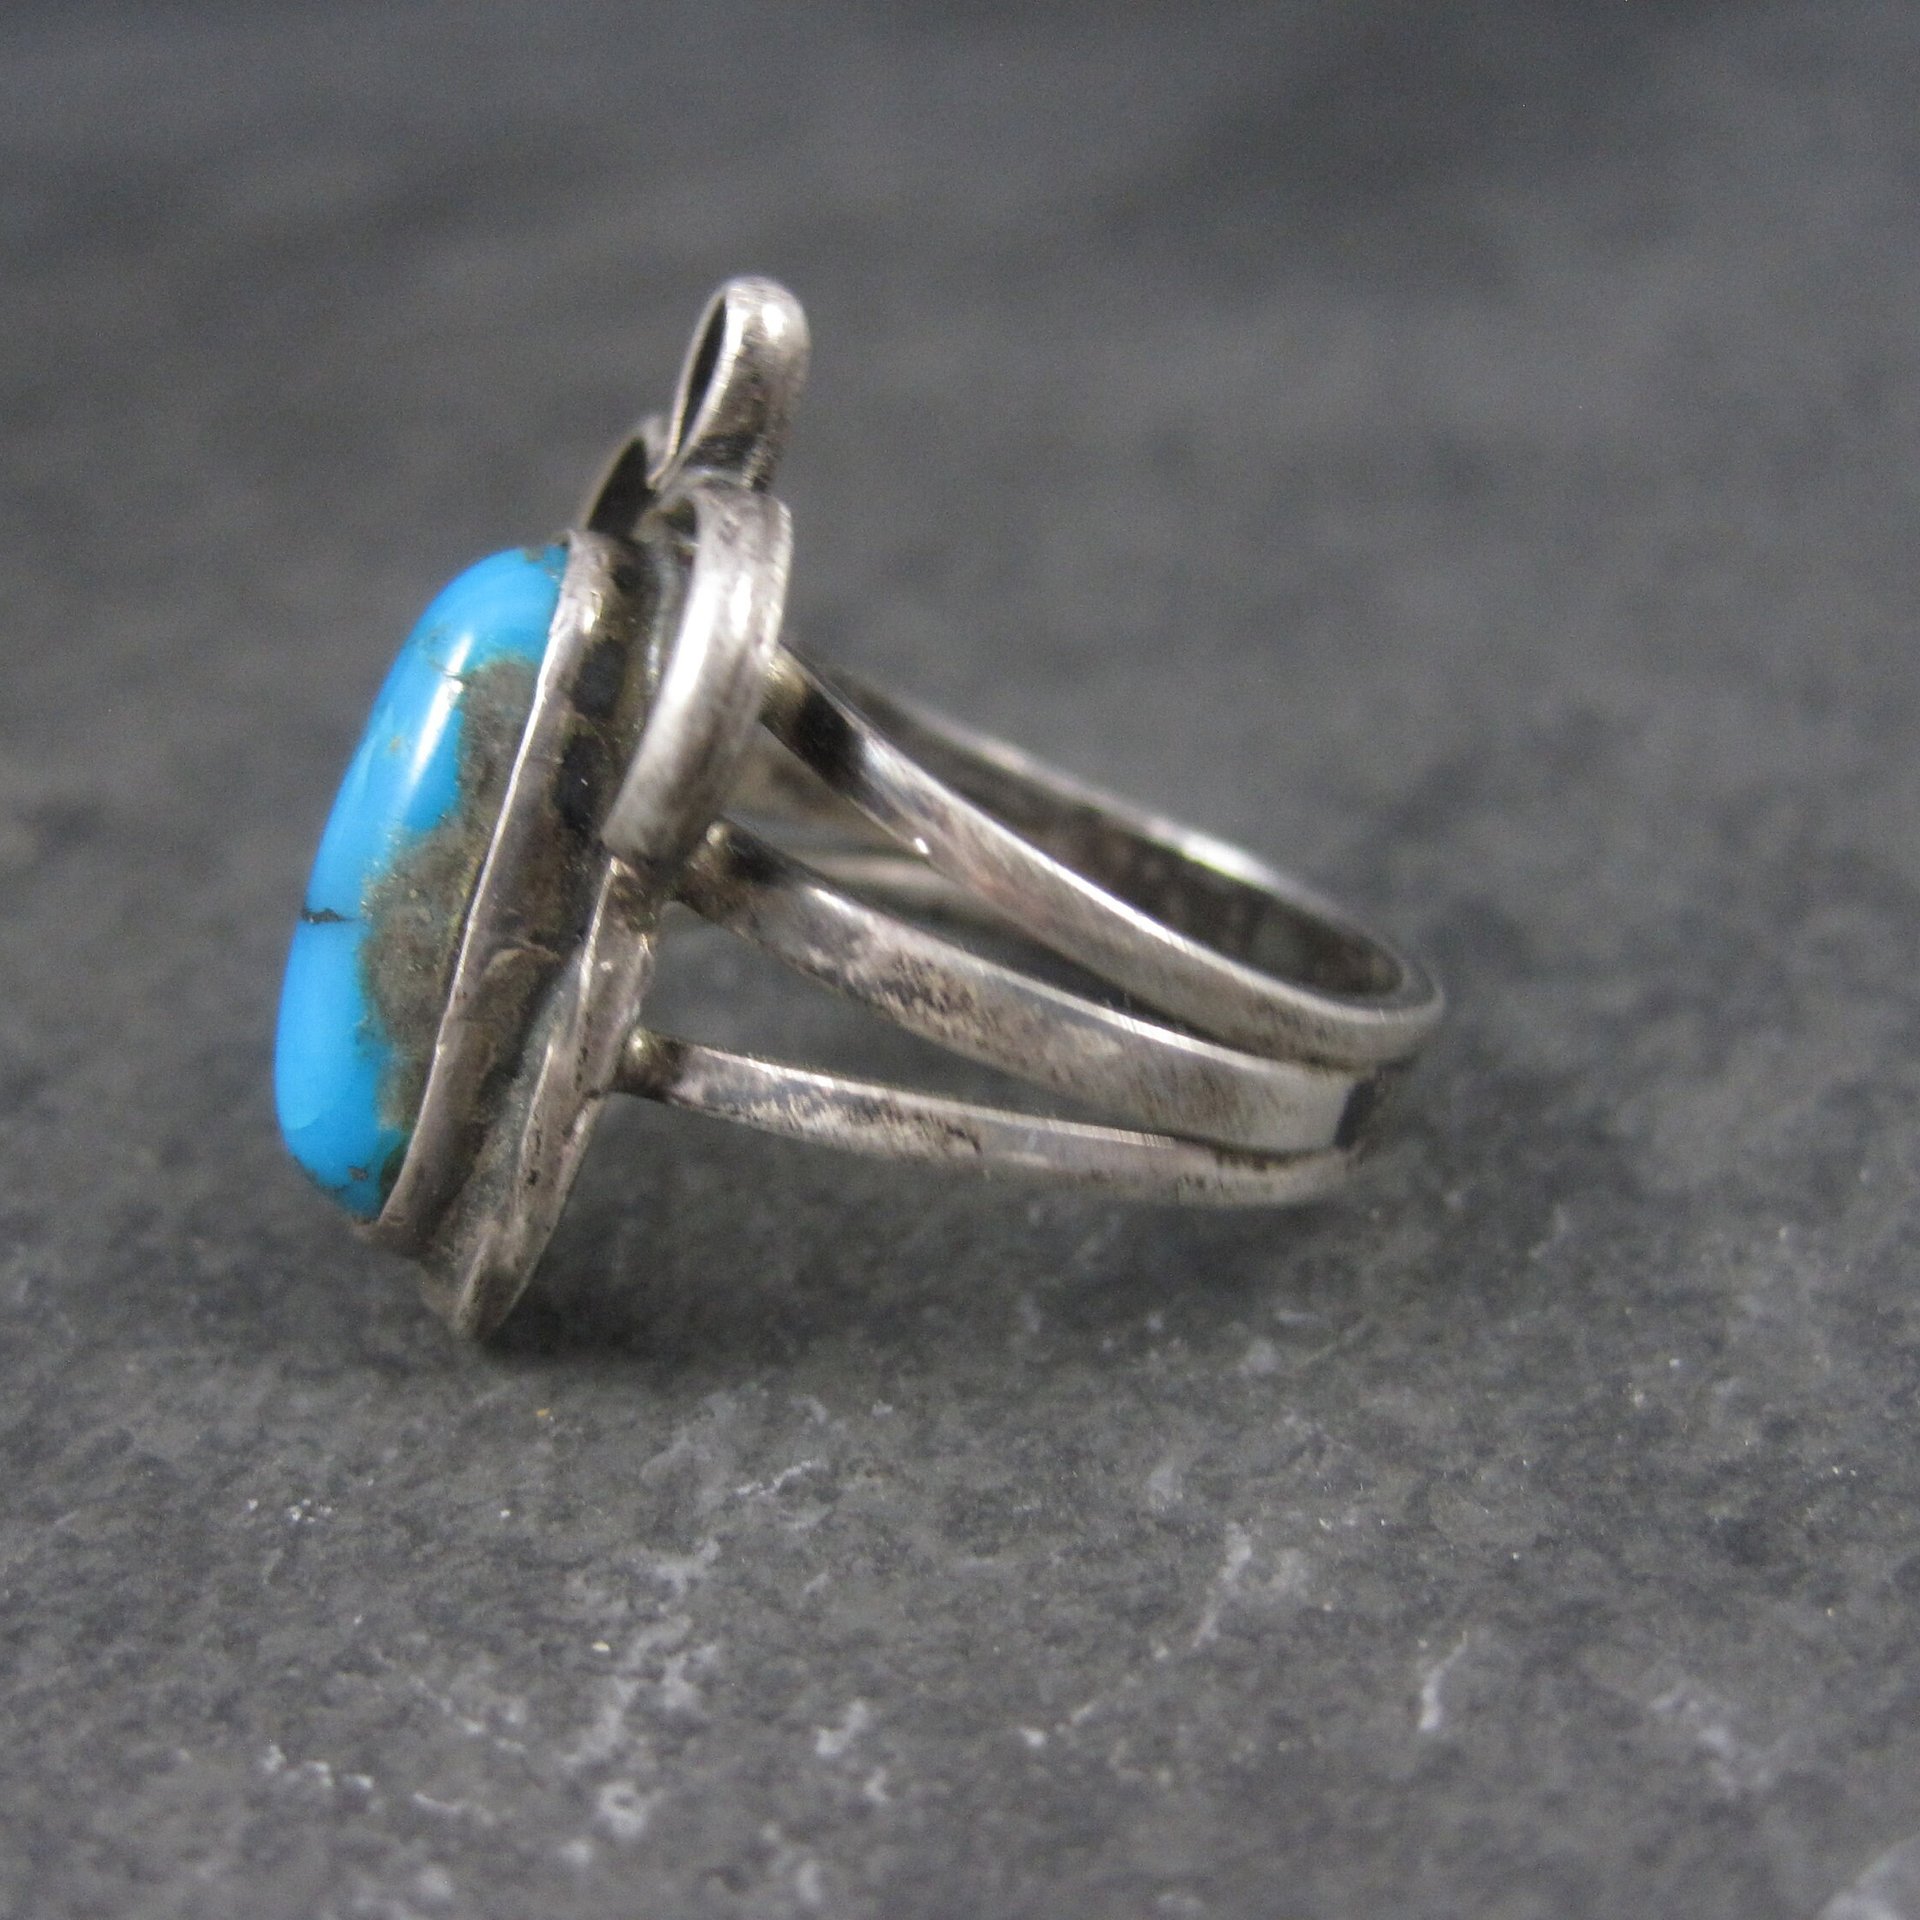 Vintage Southwestern Sterling Turquoise Ring Size 7